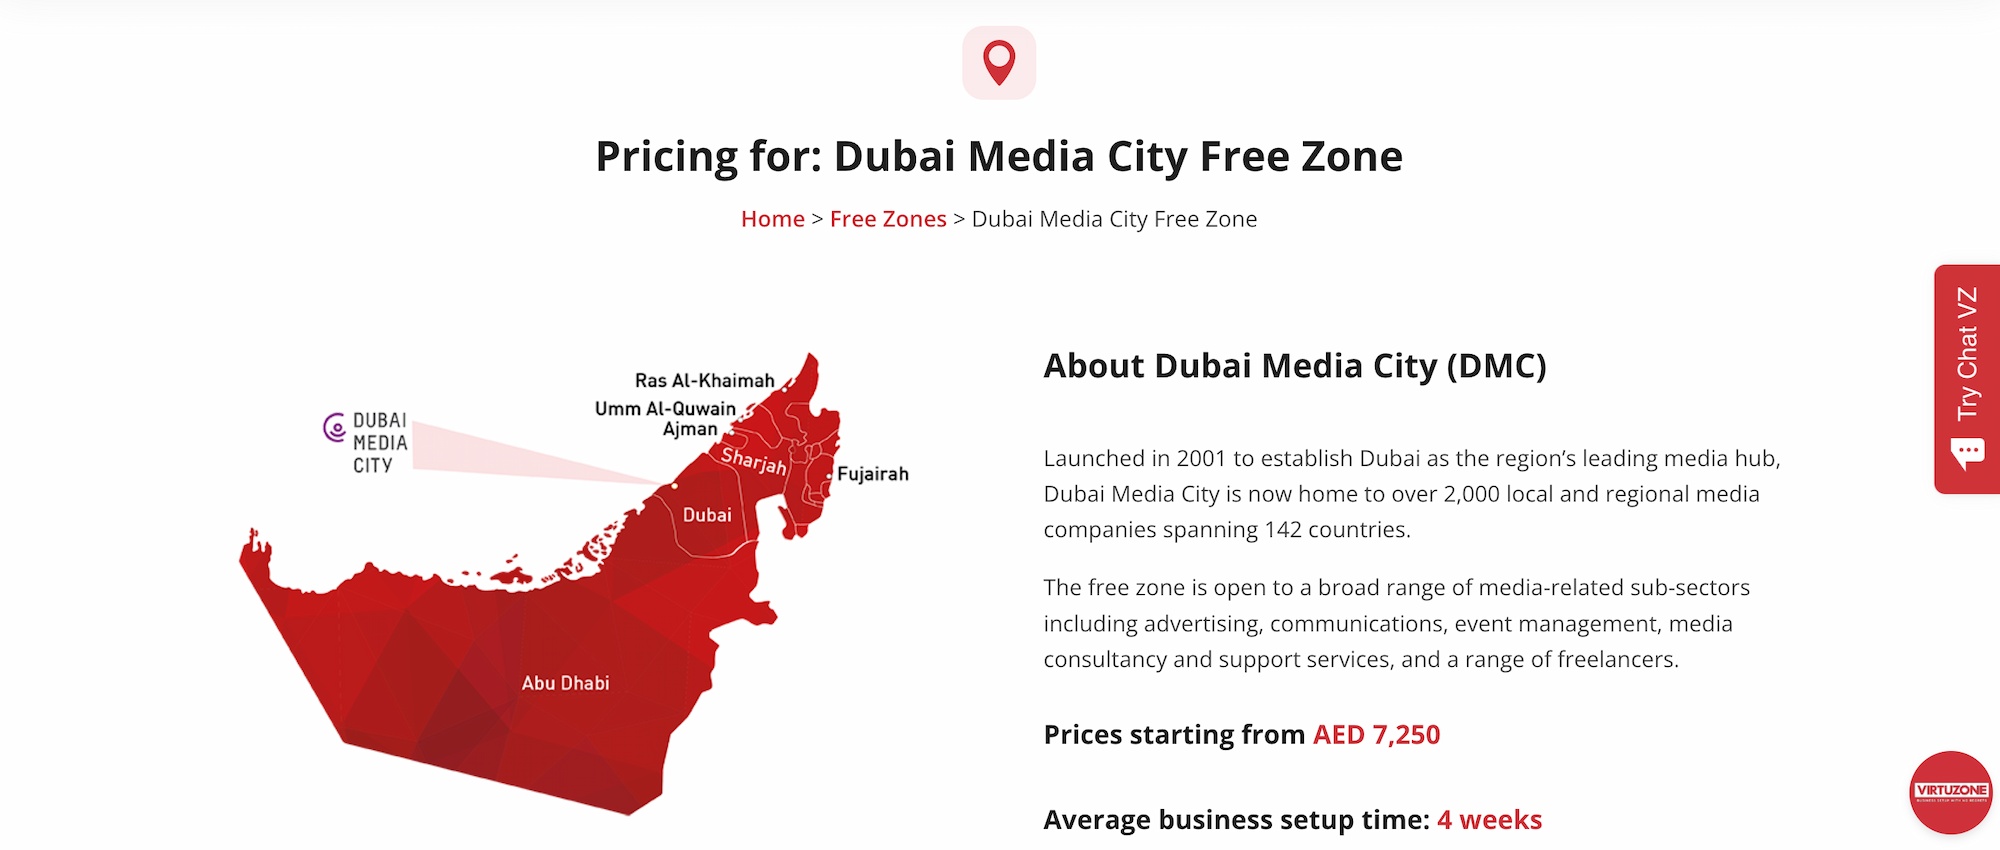 An overview and pricing information of the Dubai Media City Free Zone.